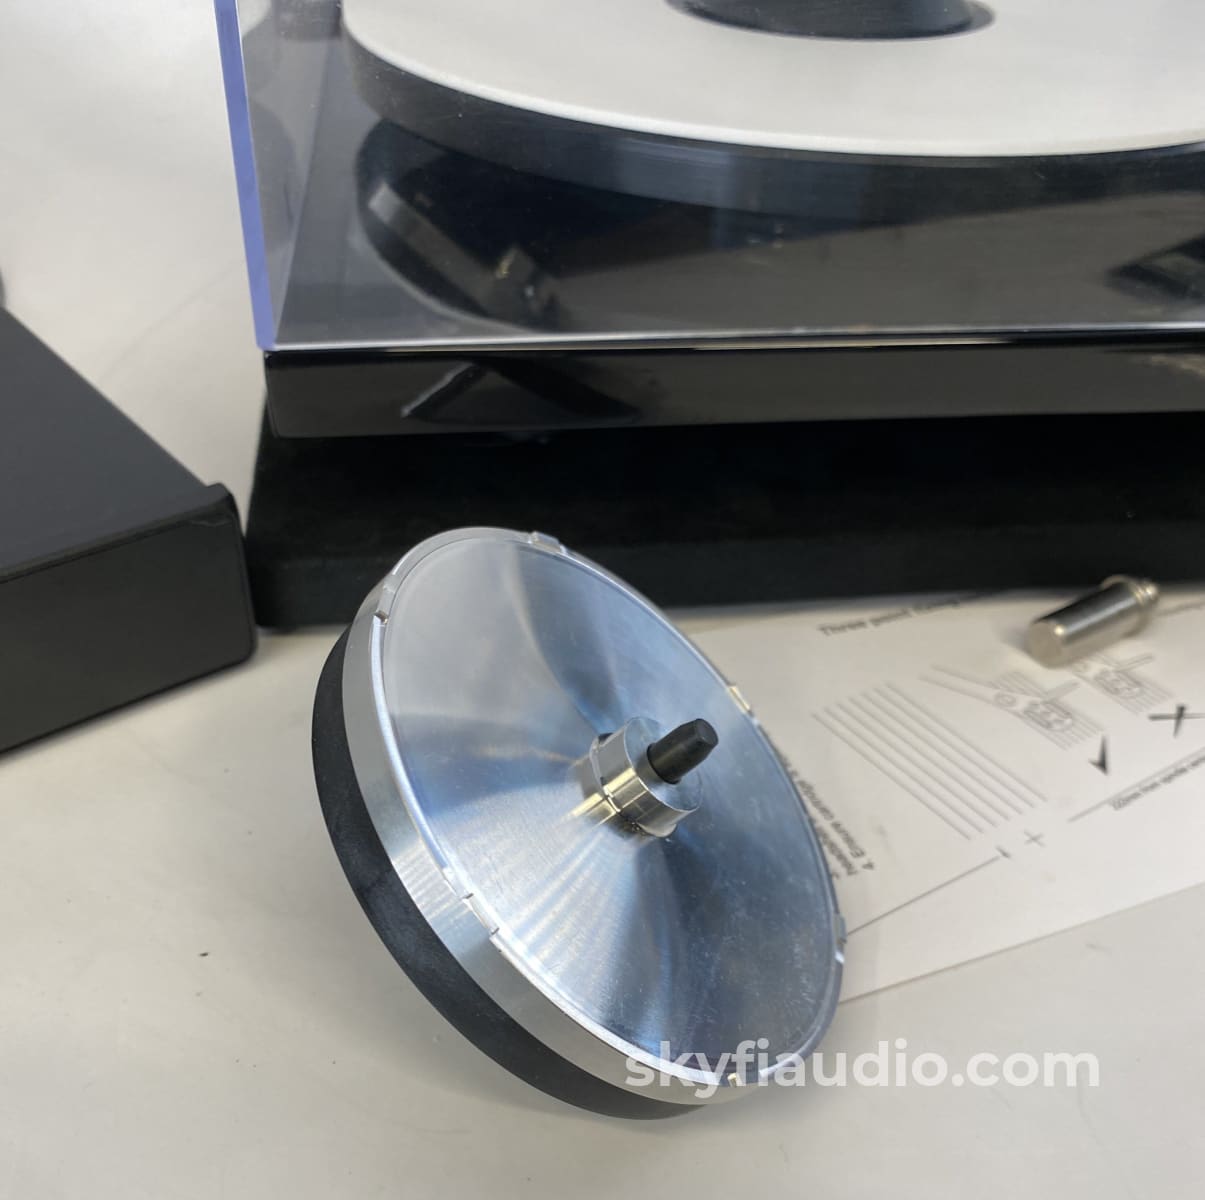 Rega Rp6 Turntable With Many Upgrades And New Sumiko Mc Cartridge